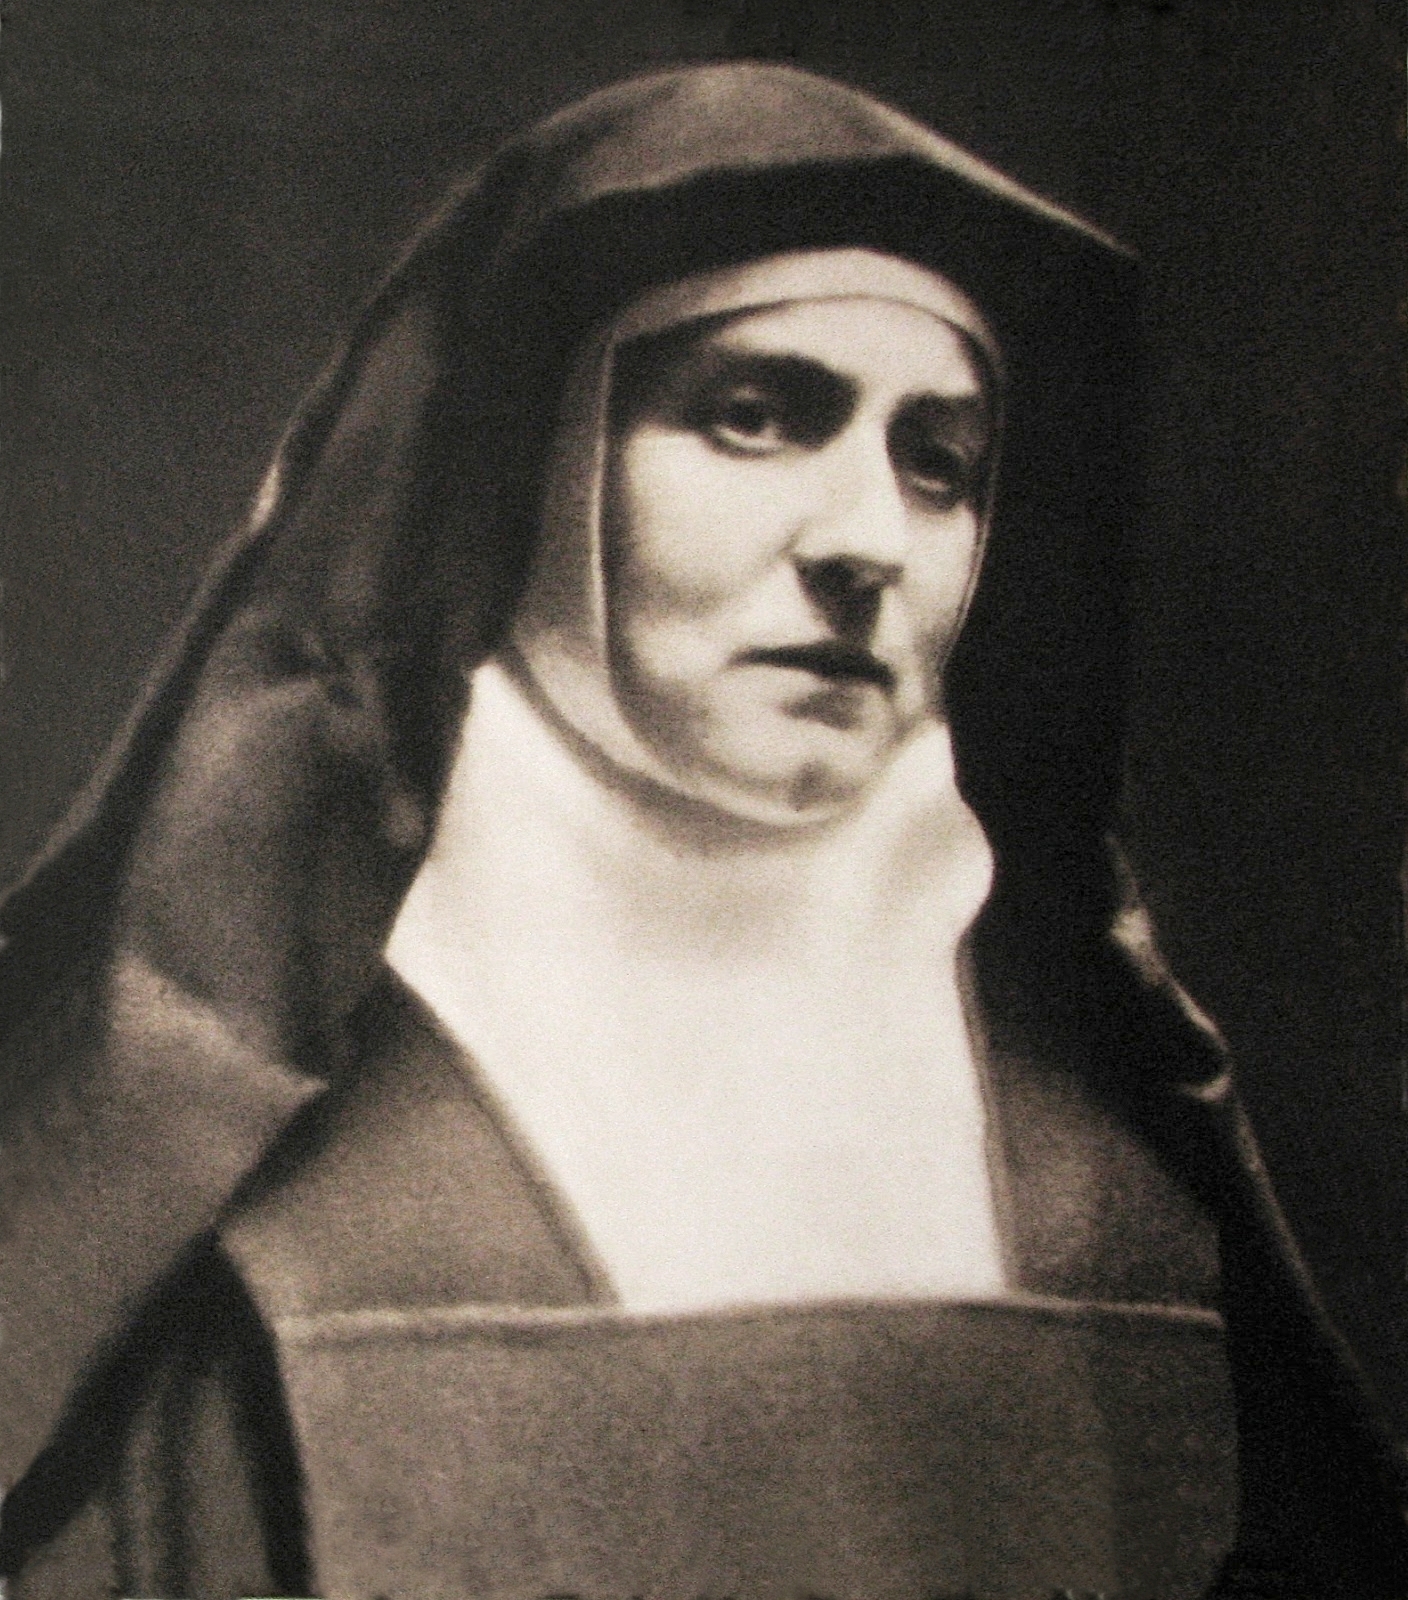 edith stein picture for catholic morning meditation